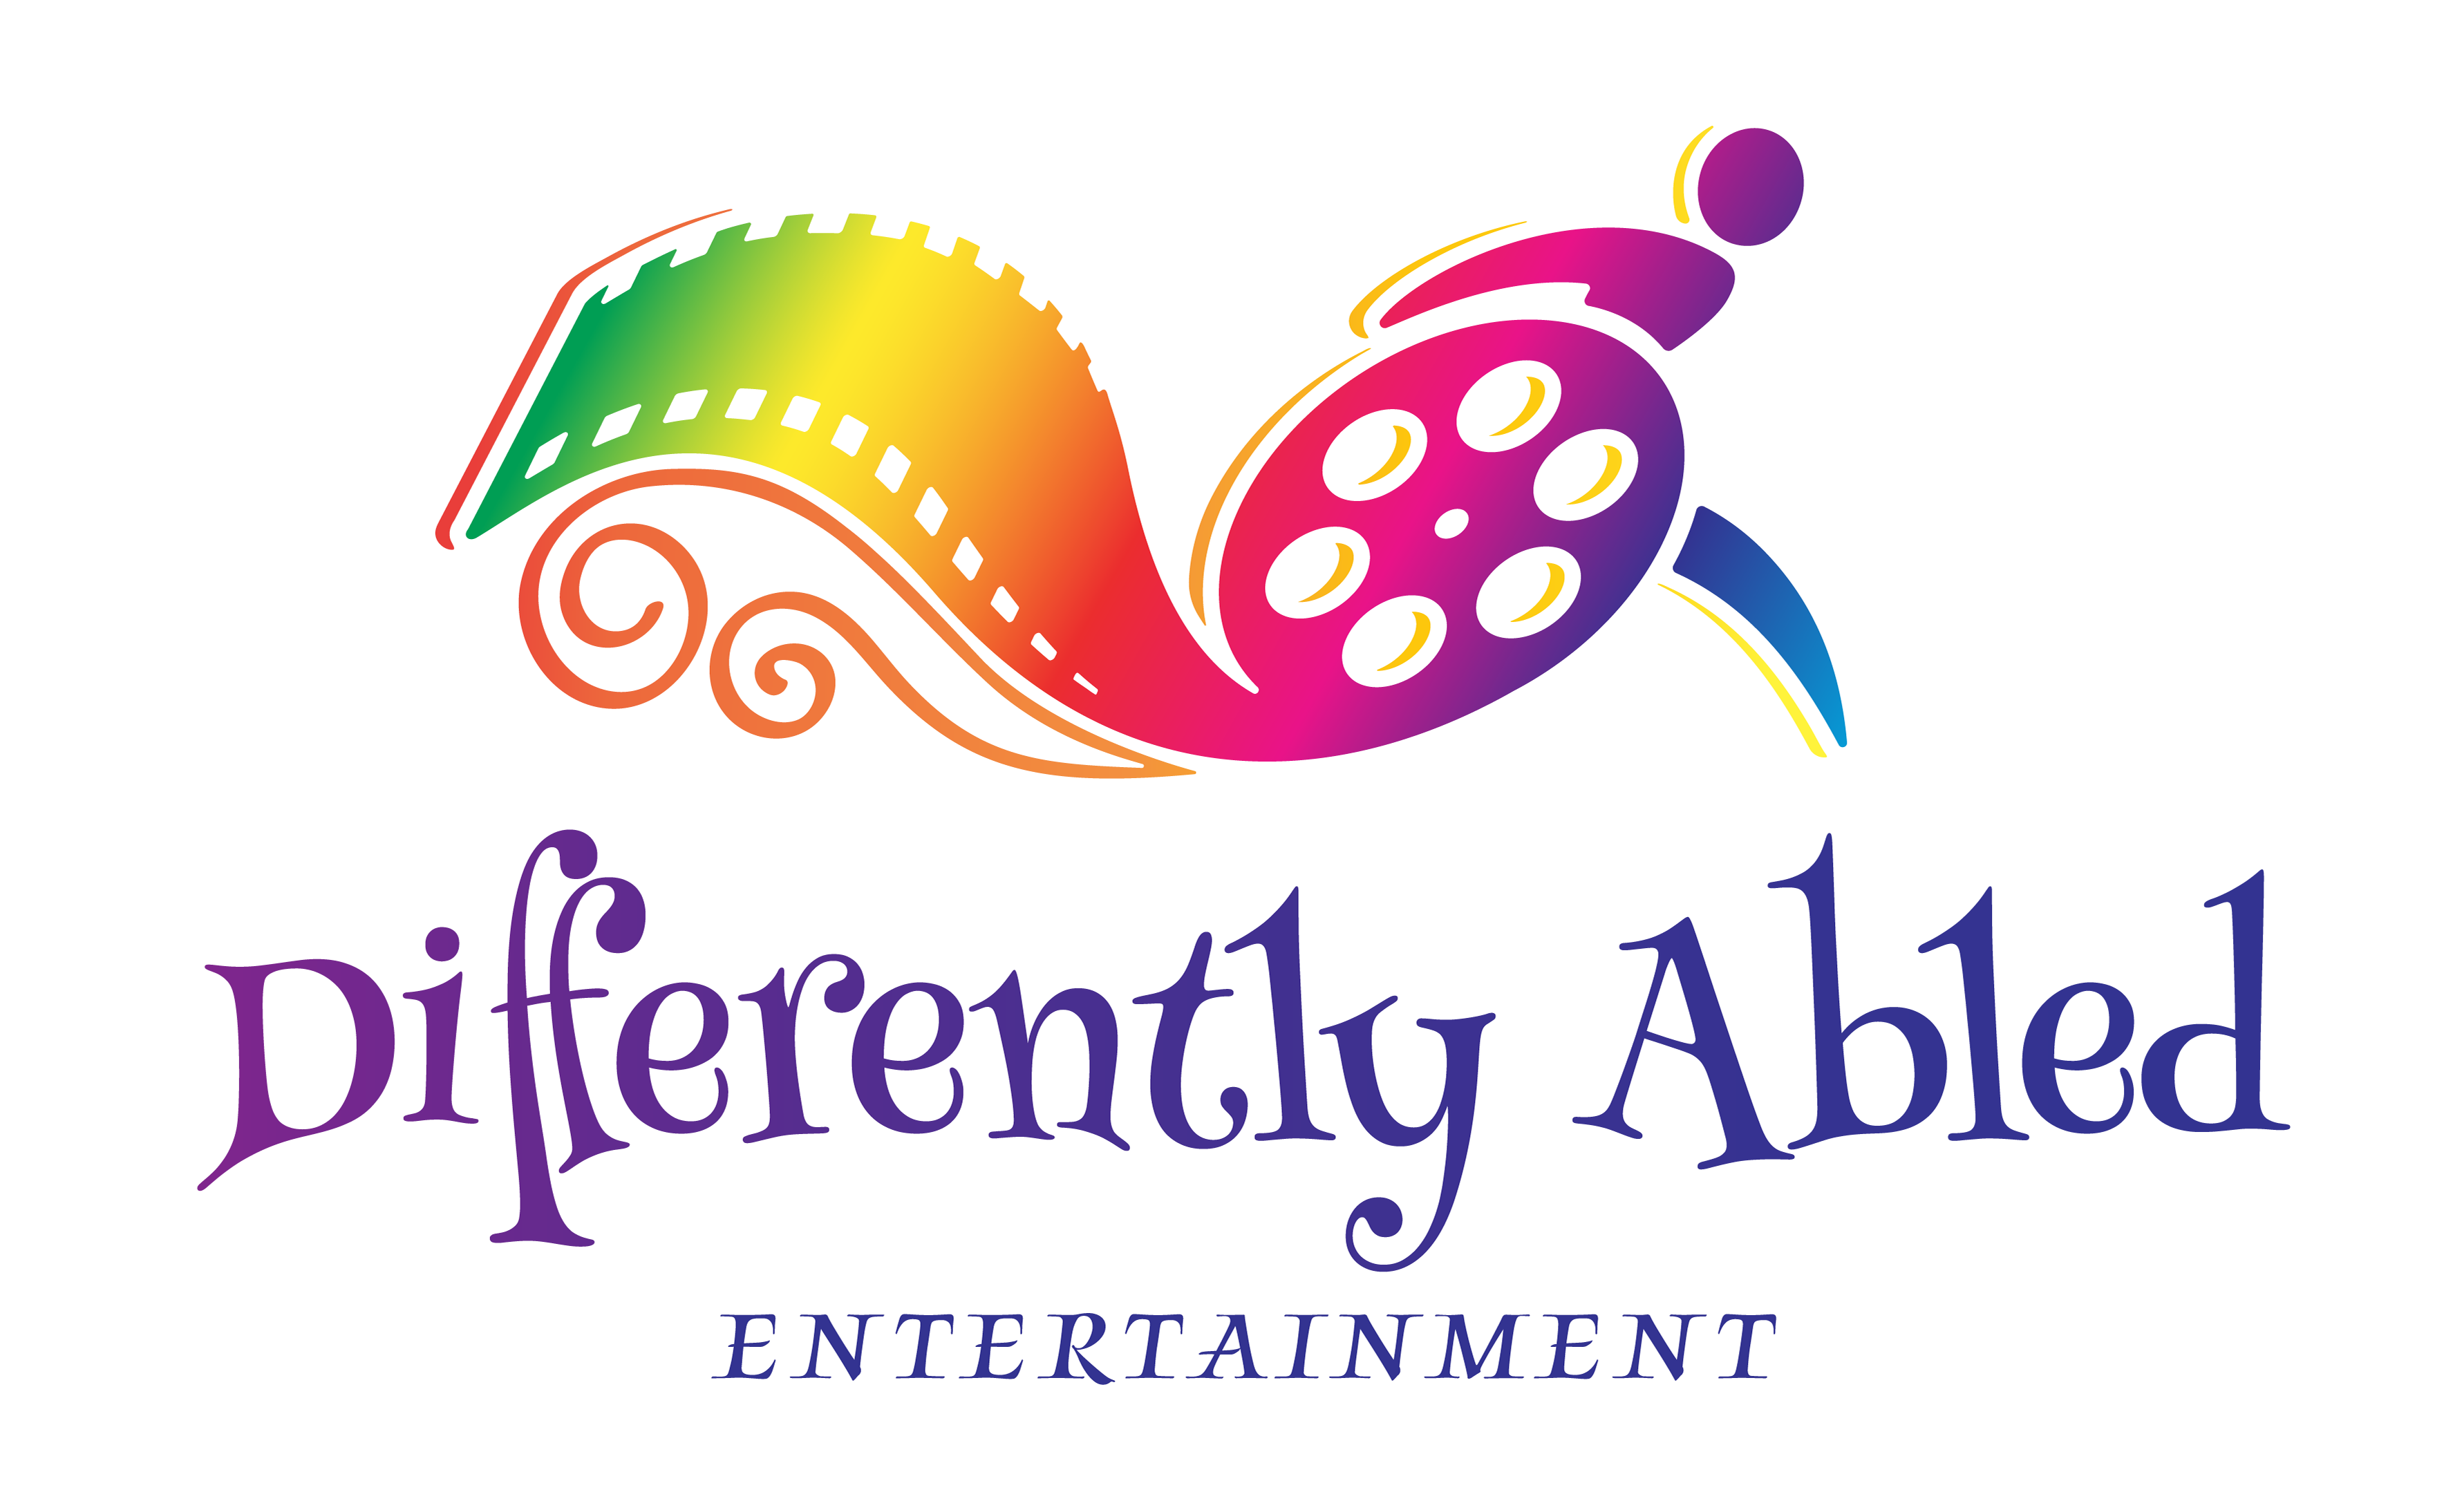 Differently Abled Entertainment